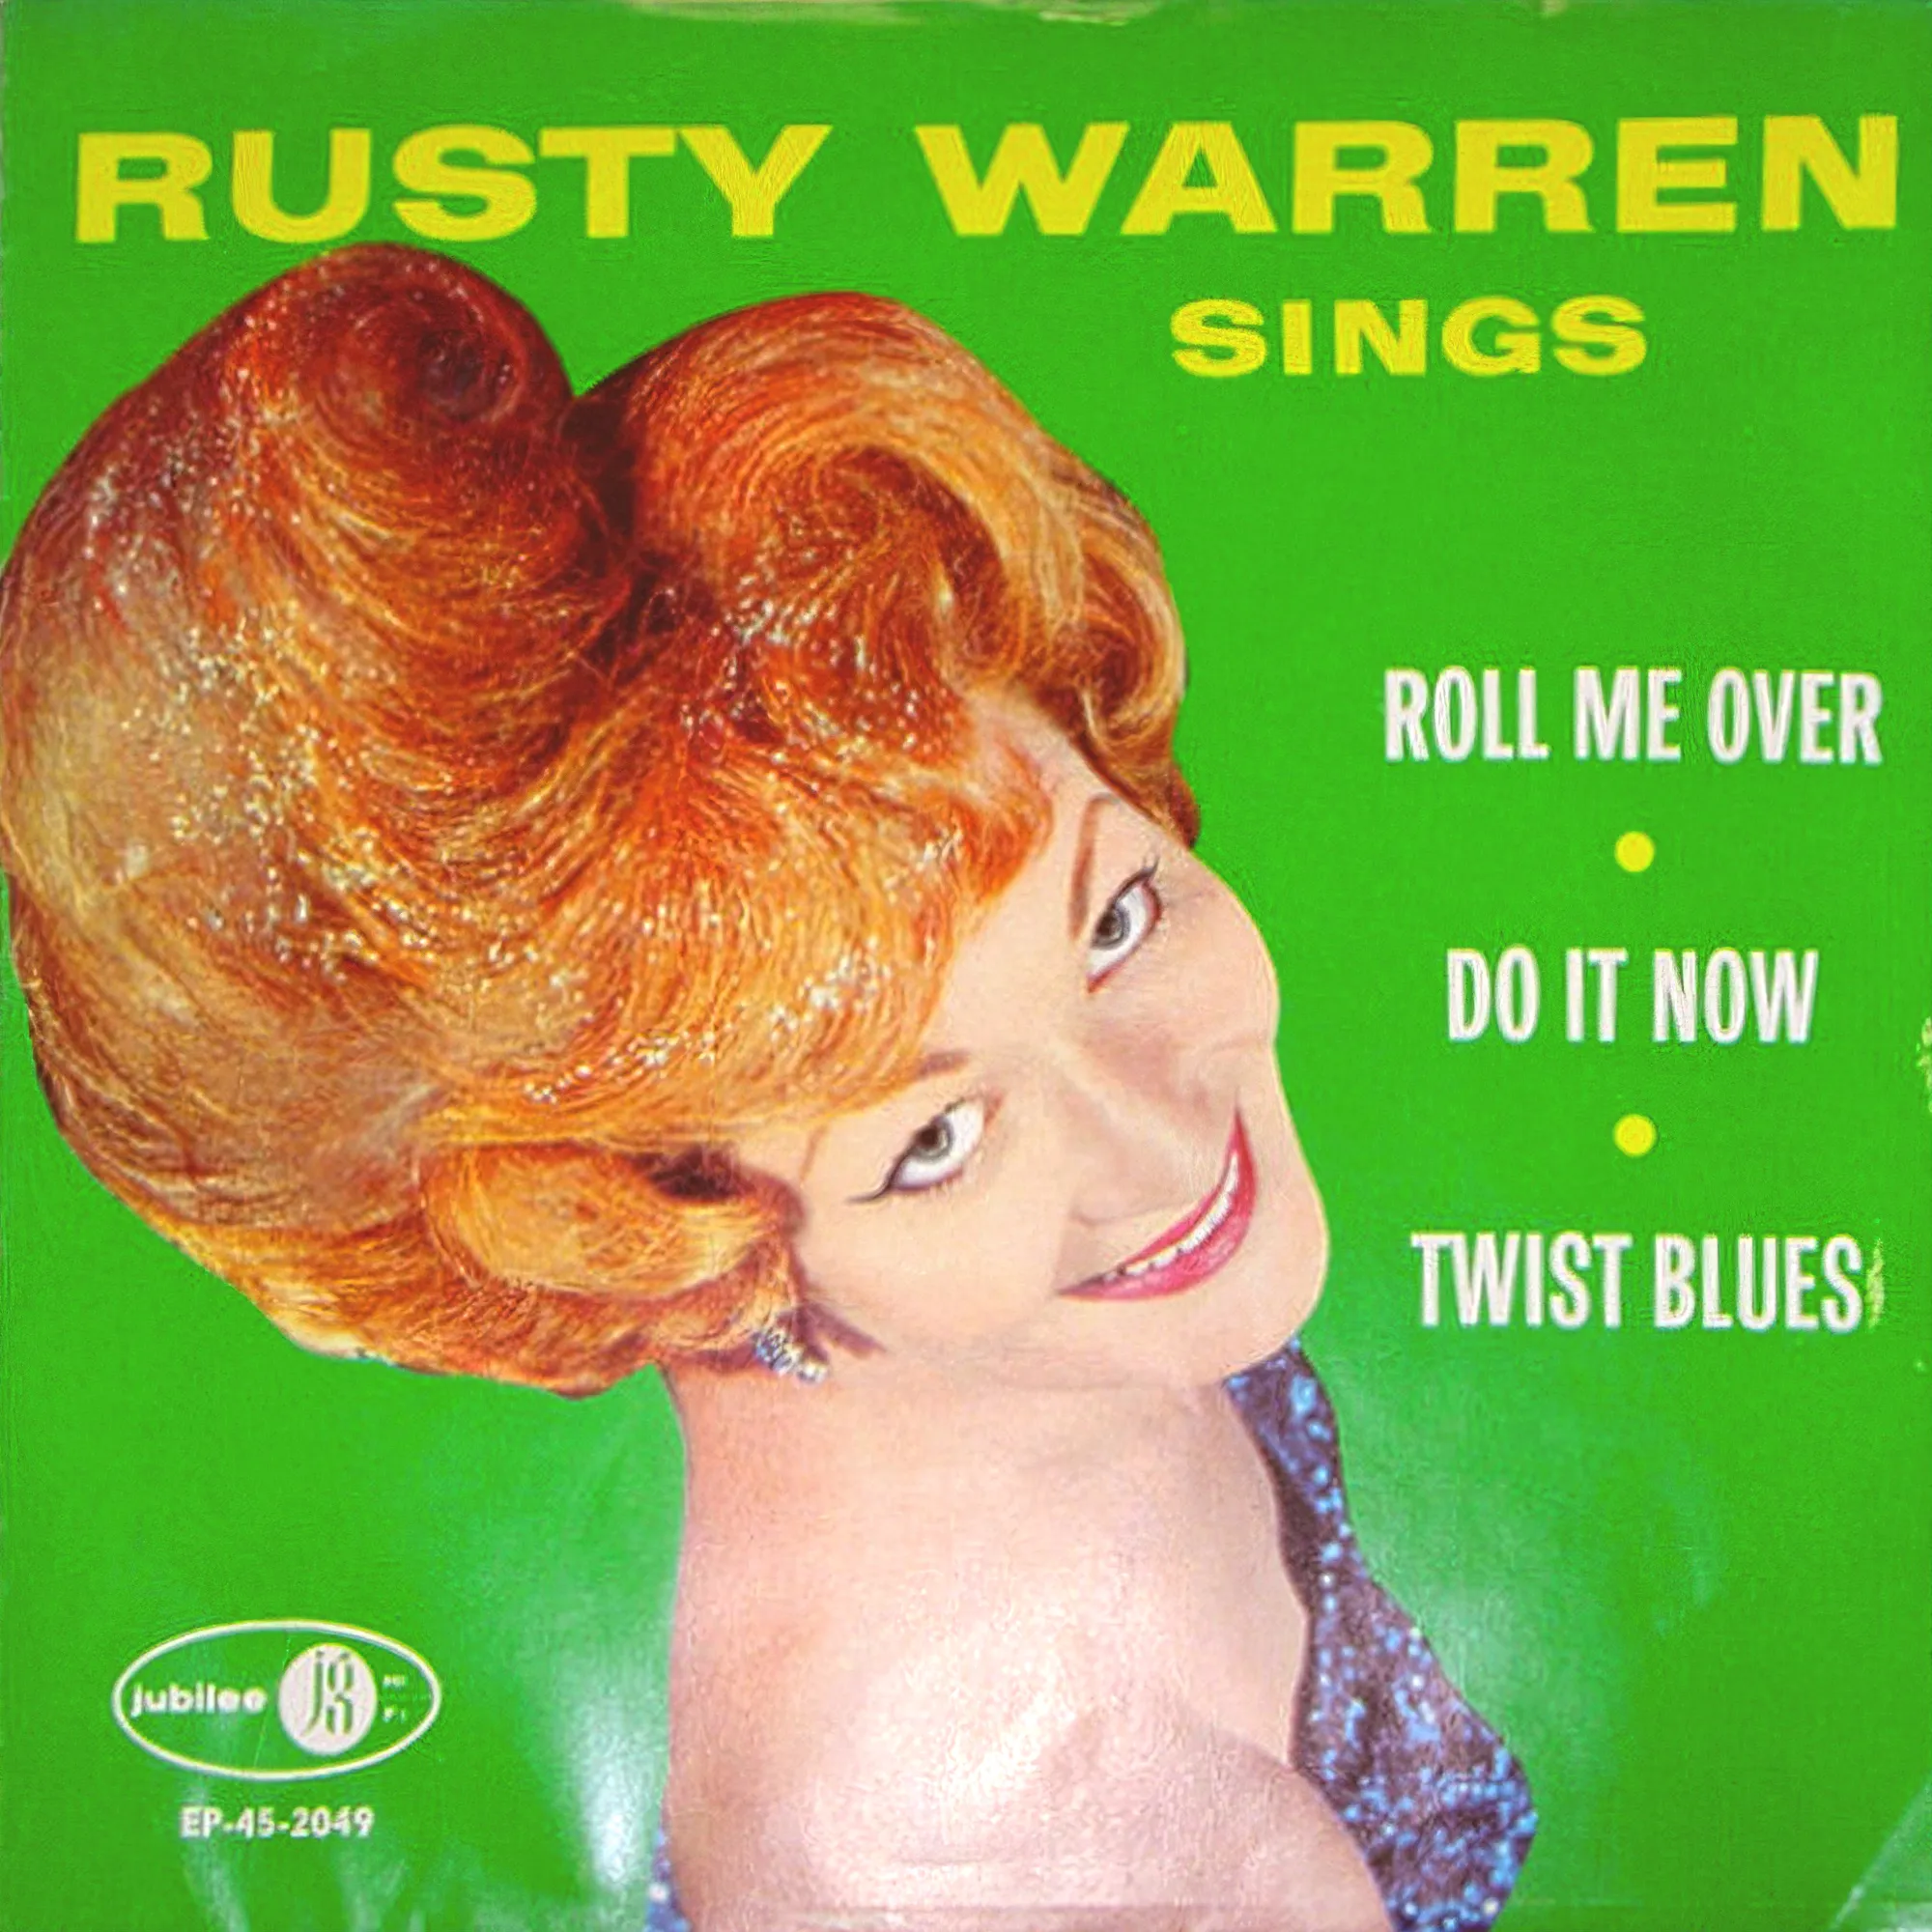 record cover for Rusty Warren Sings rpm 45 EP